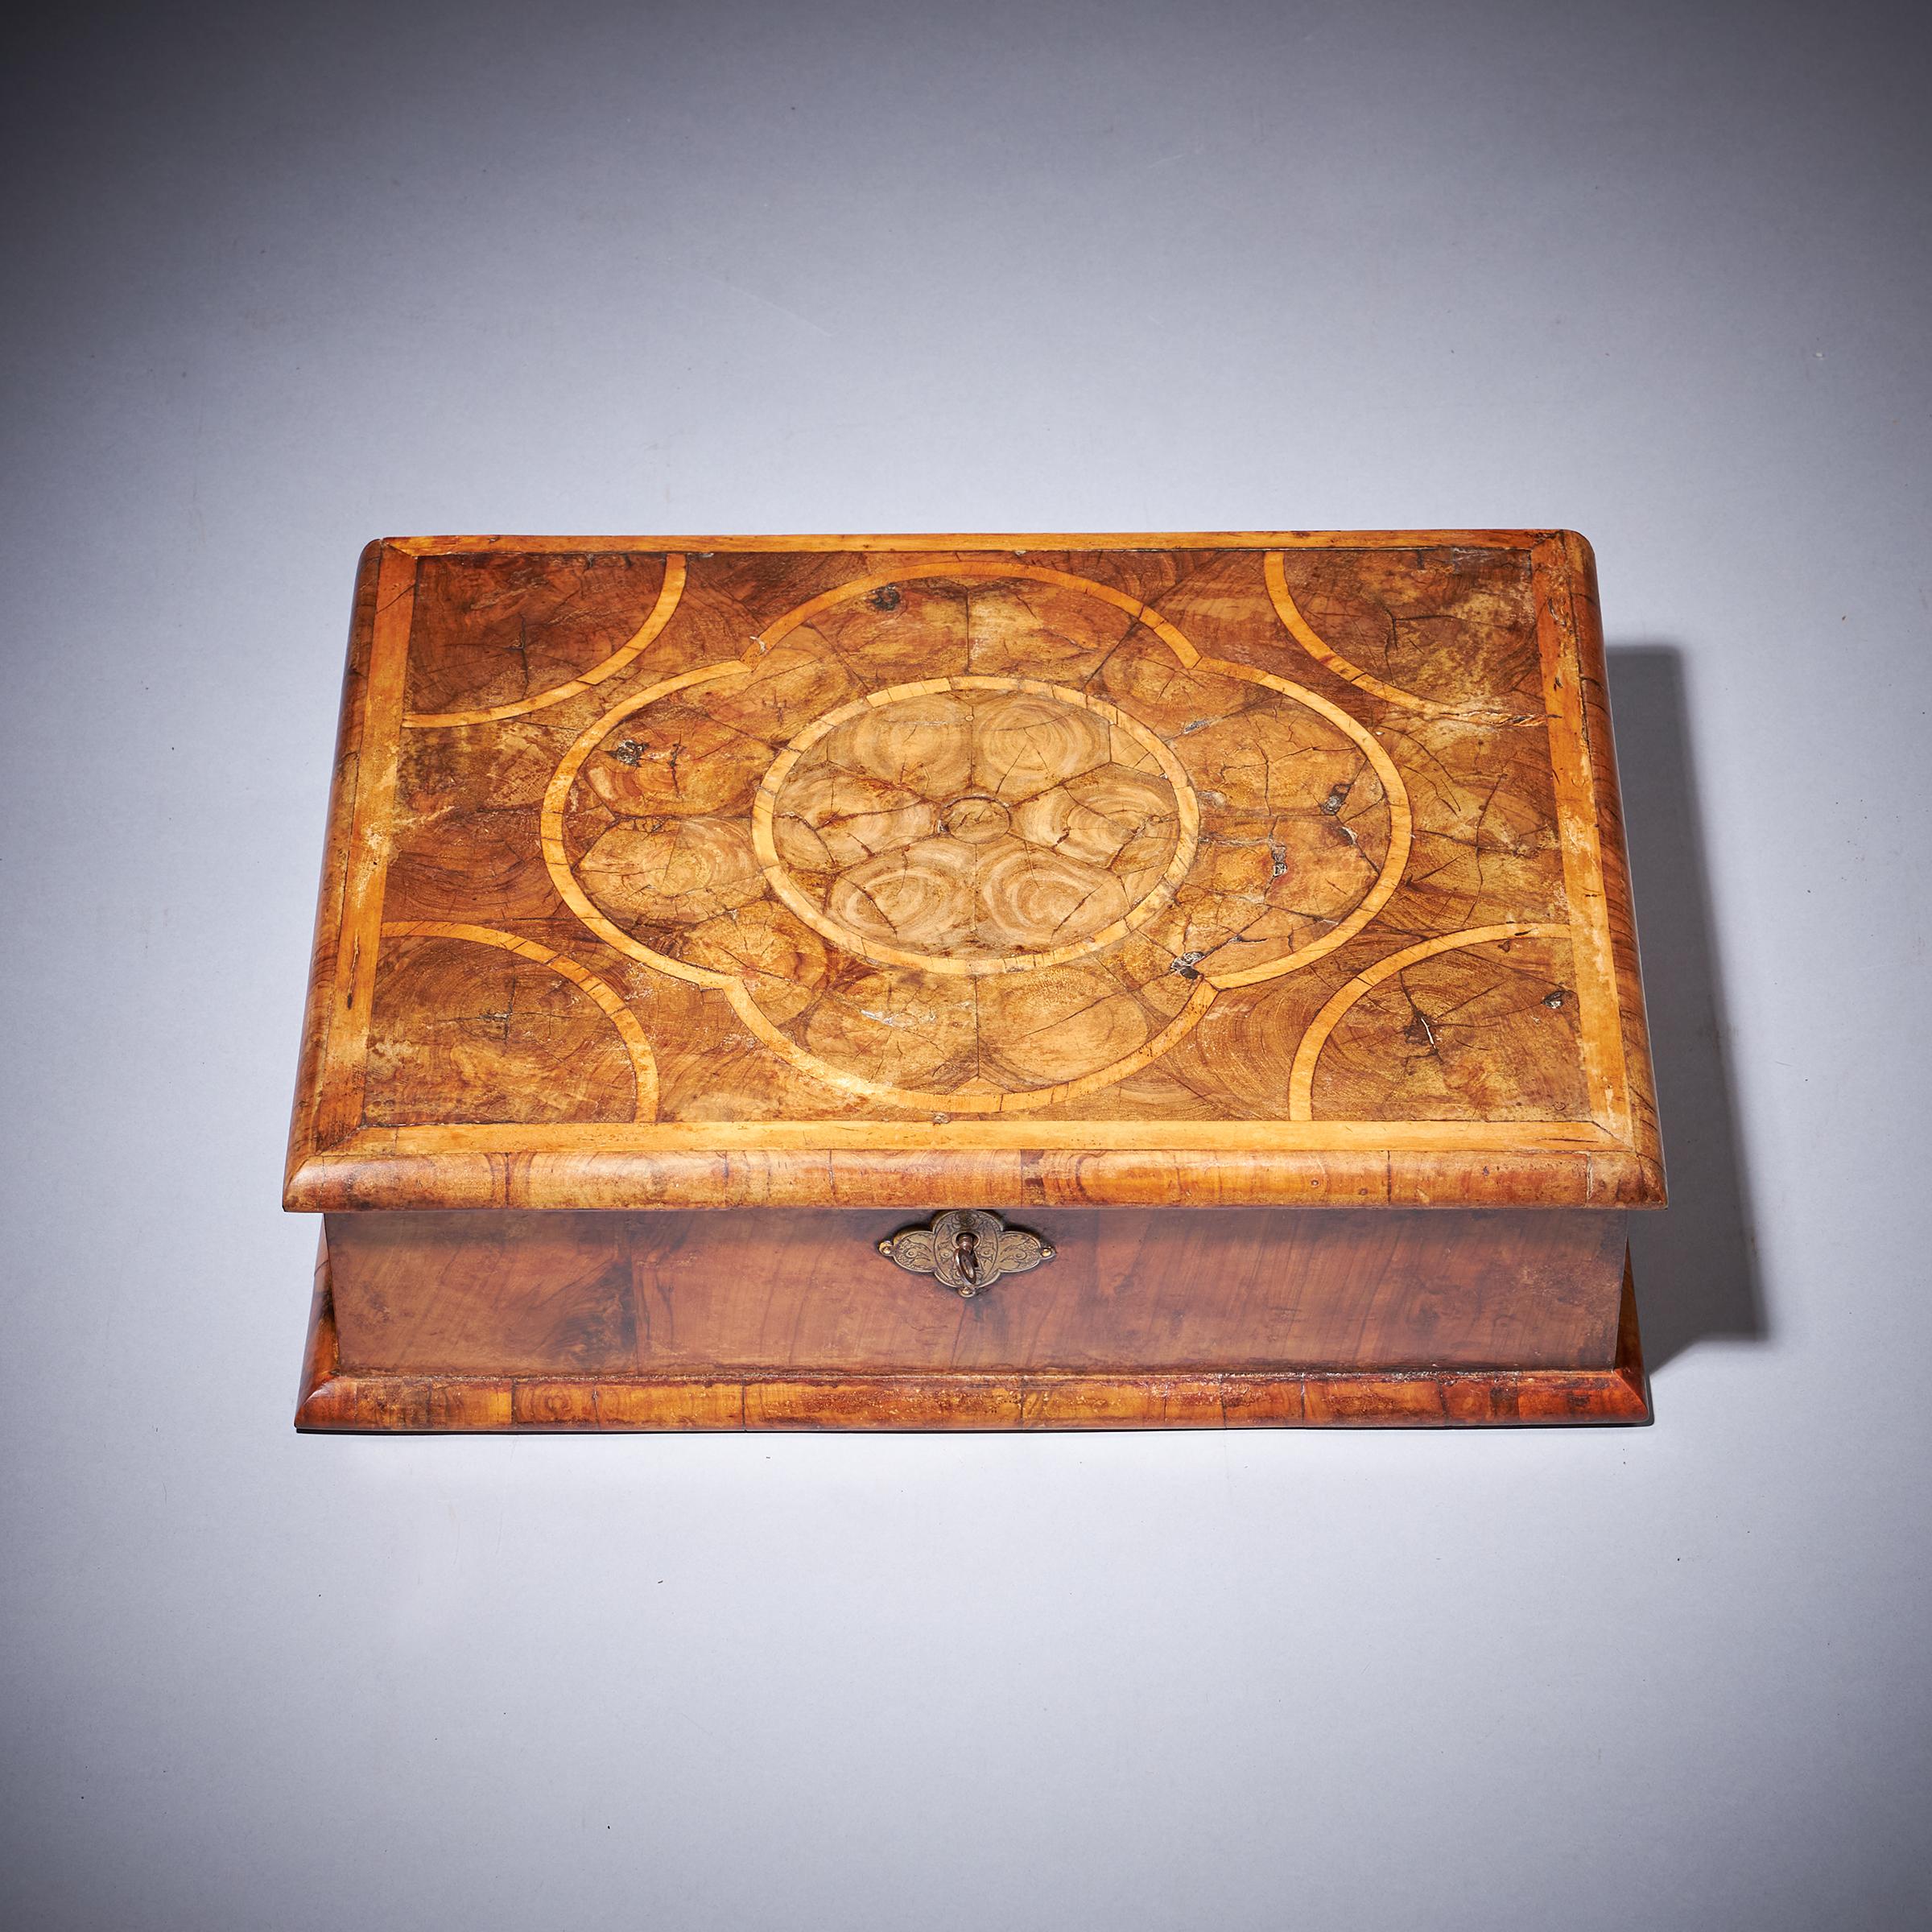 17th Century William and Mary Olive Oyster Lace Box, Circa 1680-1700 In Good Condition For Sale In Oxfordshire, United Kingdom